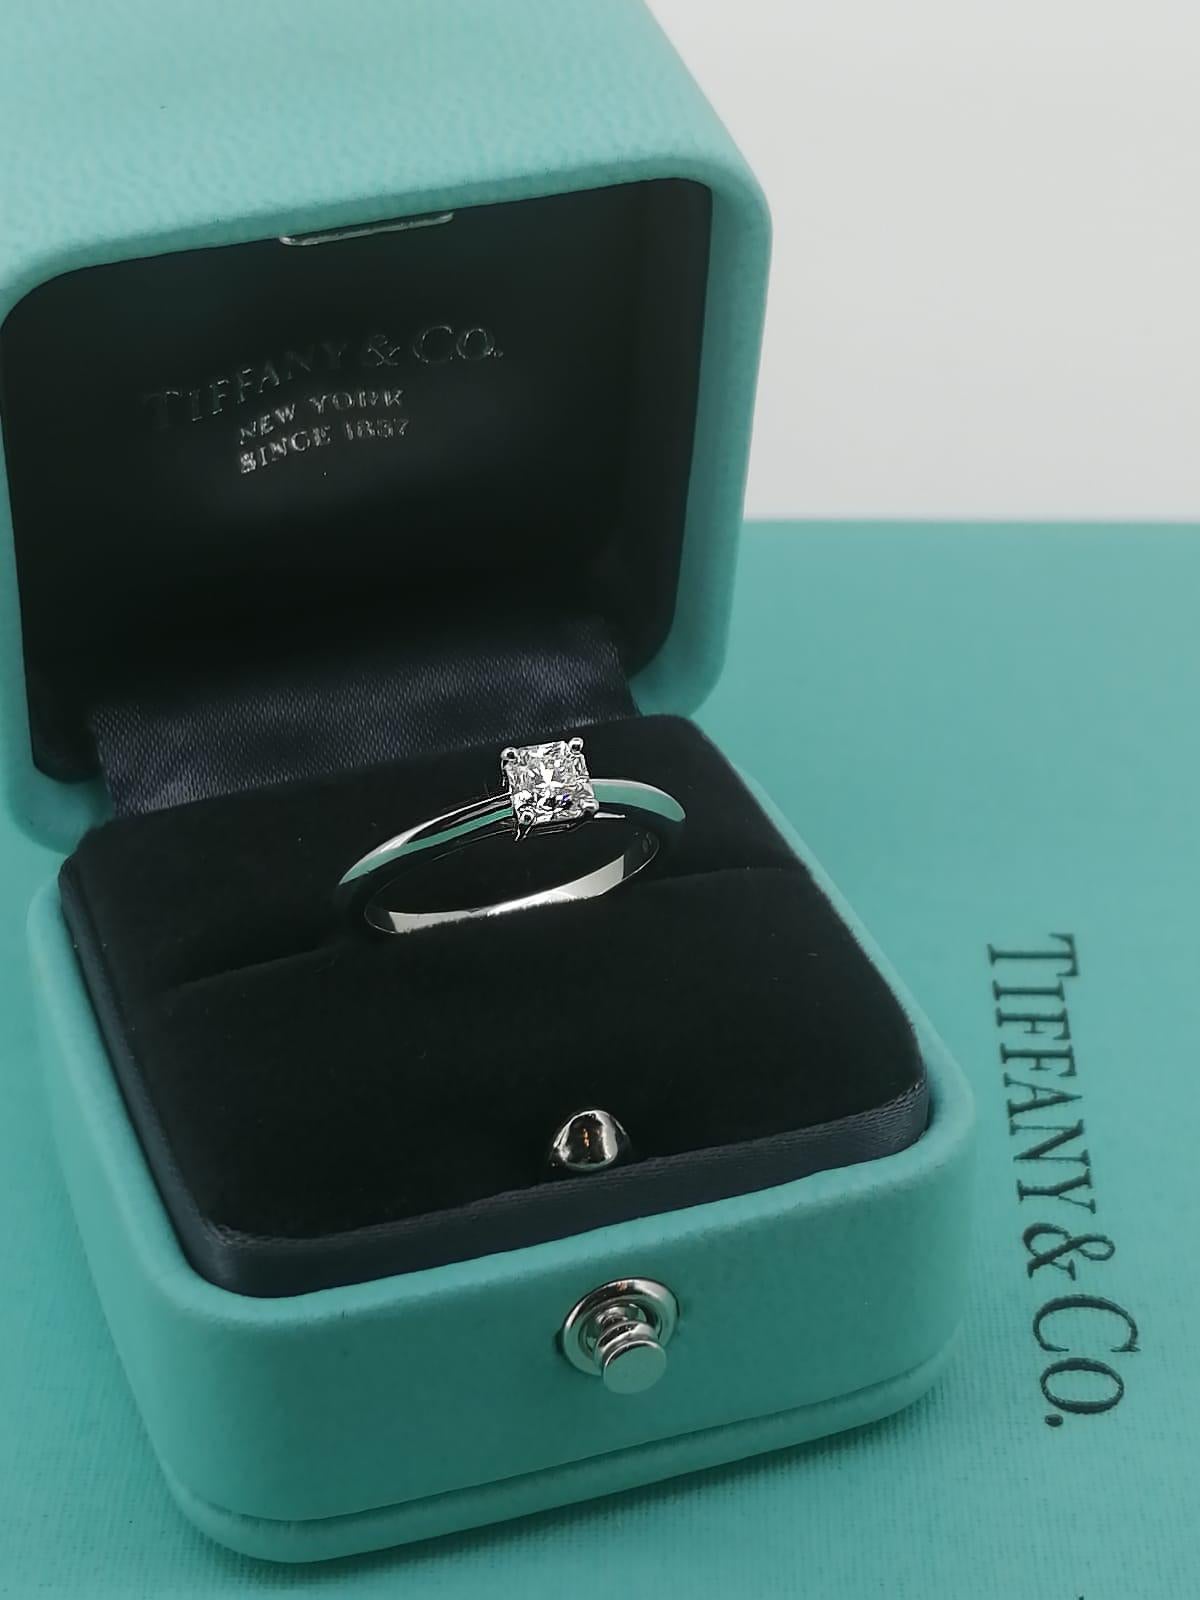 Crafted with refined elegance by Tiffany & Co, 
this diamond solitaire engagement ring is THE one 

Impeccable provenance, top quality materials, 
along with the renowned name are its highlights 

The piece comes with all original paperwork: 
-